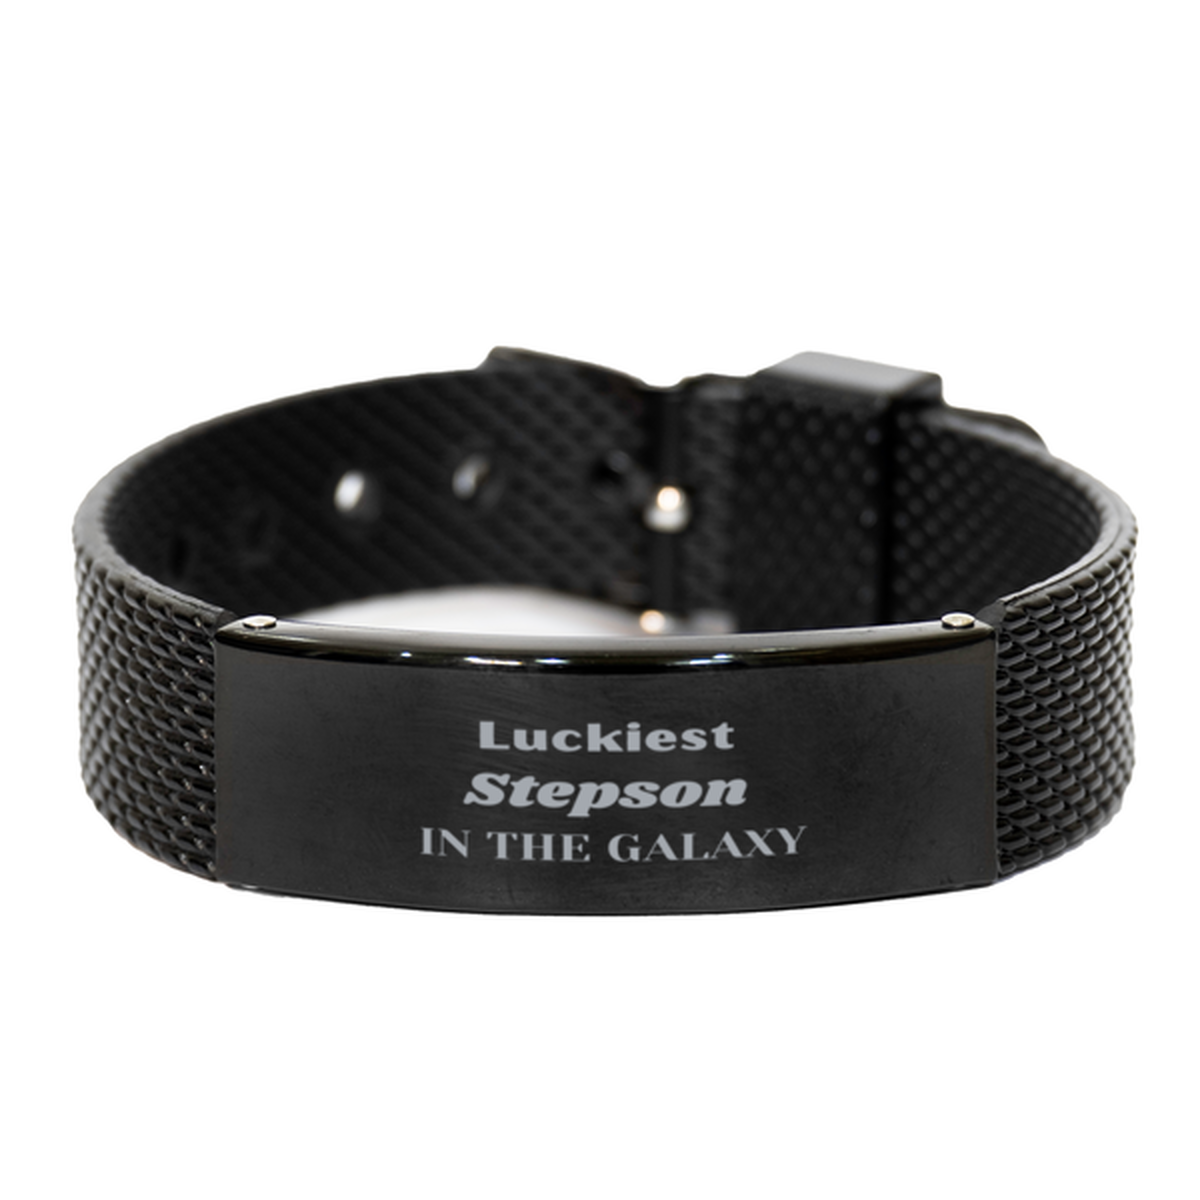 Luckiest Stepson in the Galaxy, To My Stepson Engraved Gifts, Christmas Stepson Black Shark Mesh Bracelet Gifts, X-mas Birthday Unique Gifts For Stepson Men Women